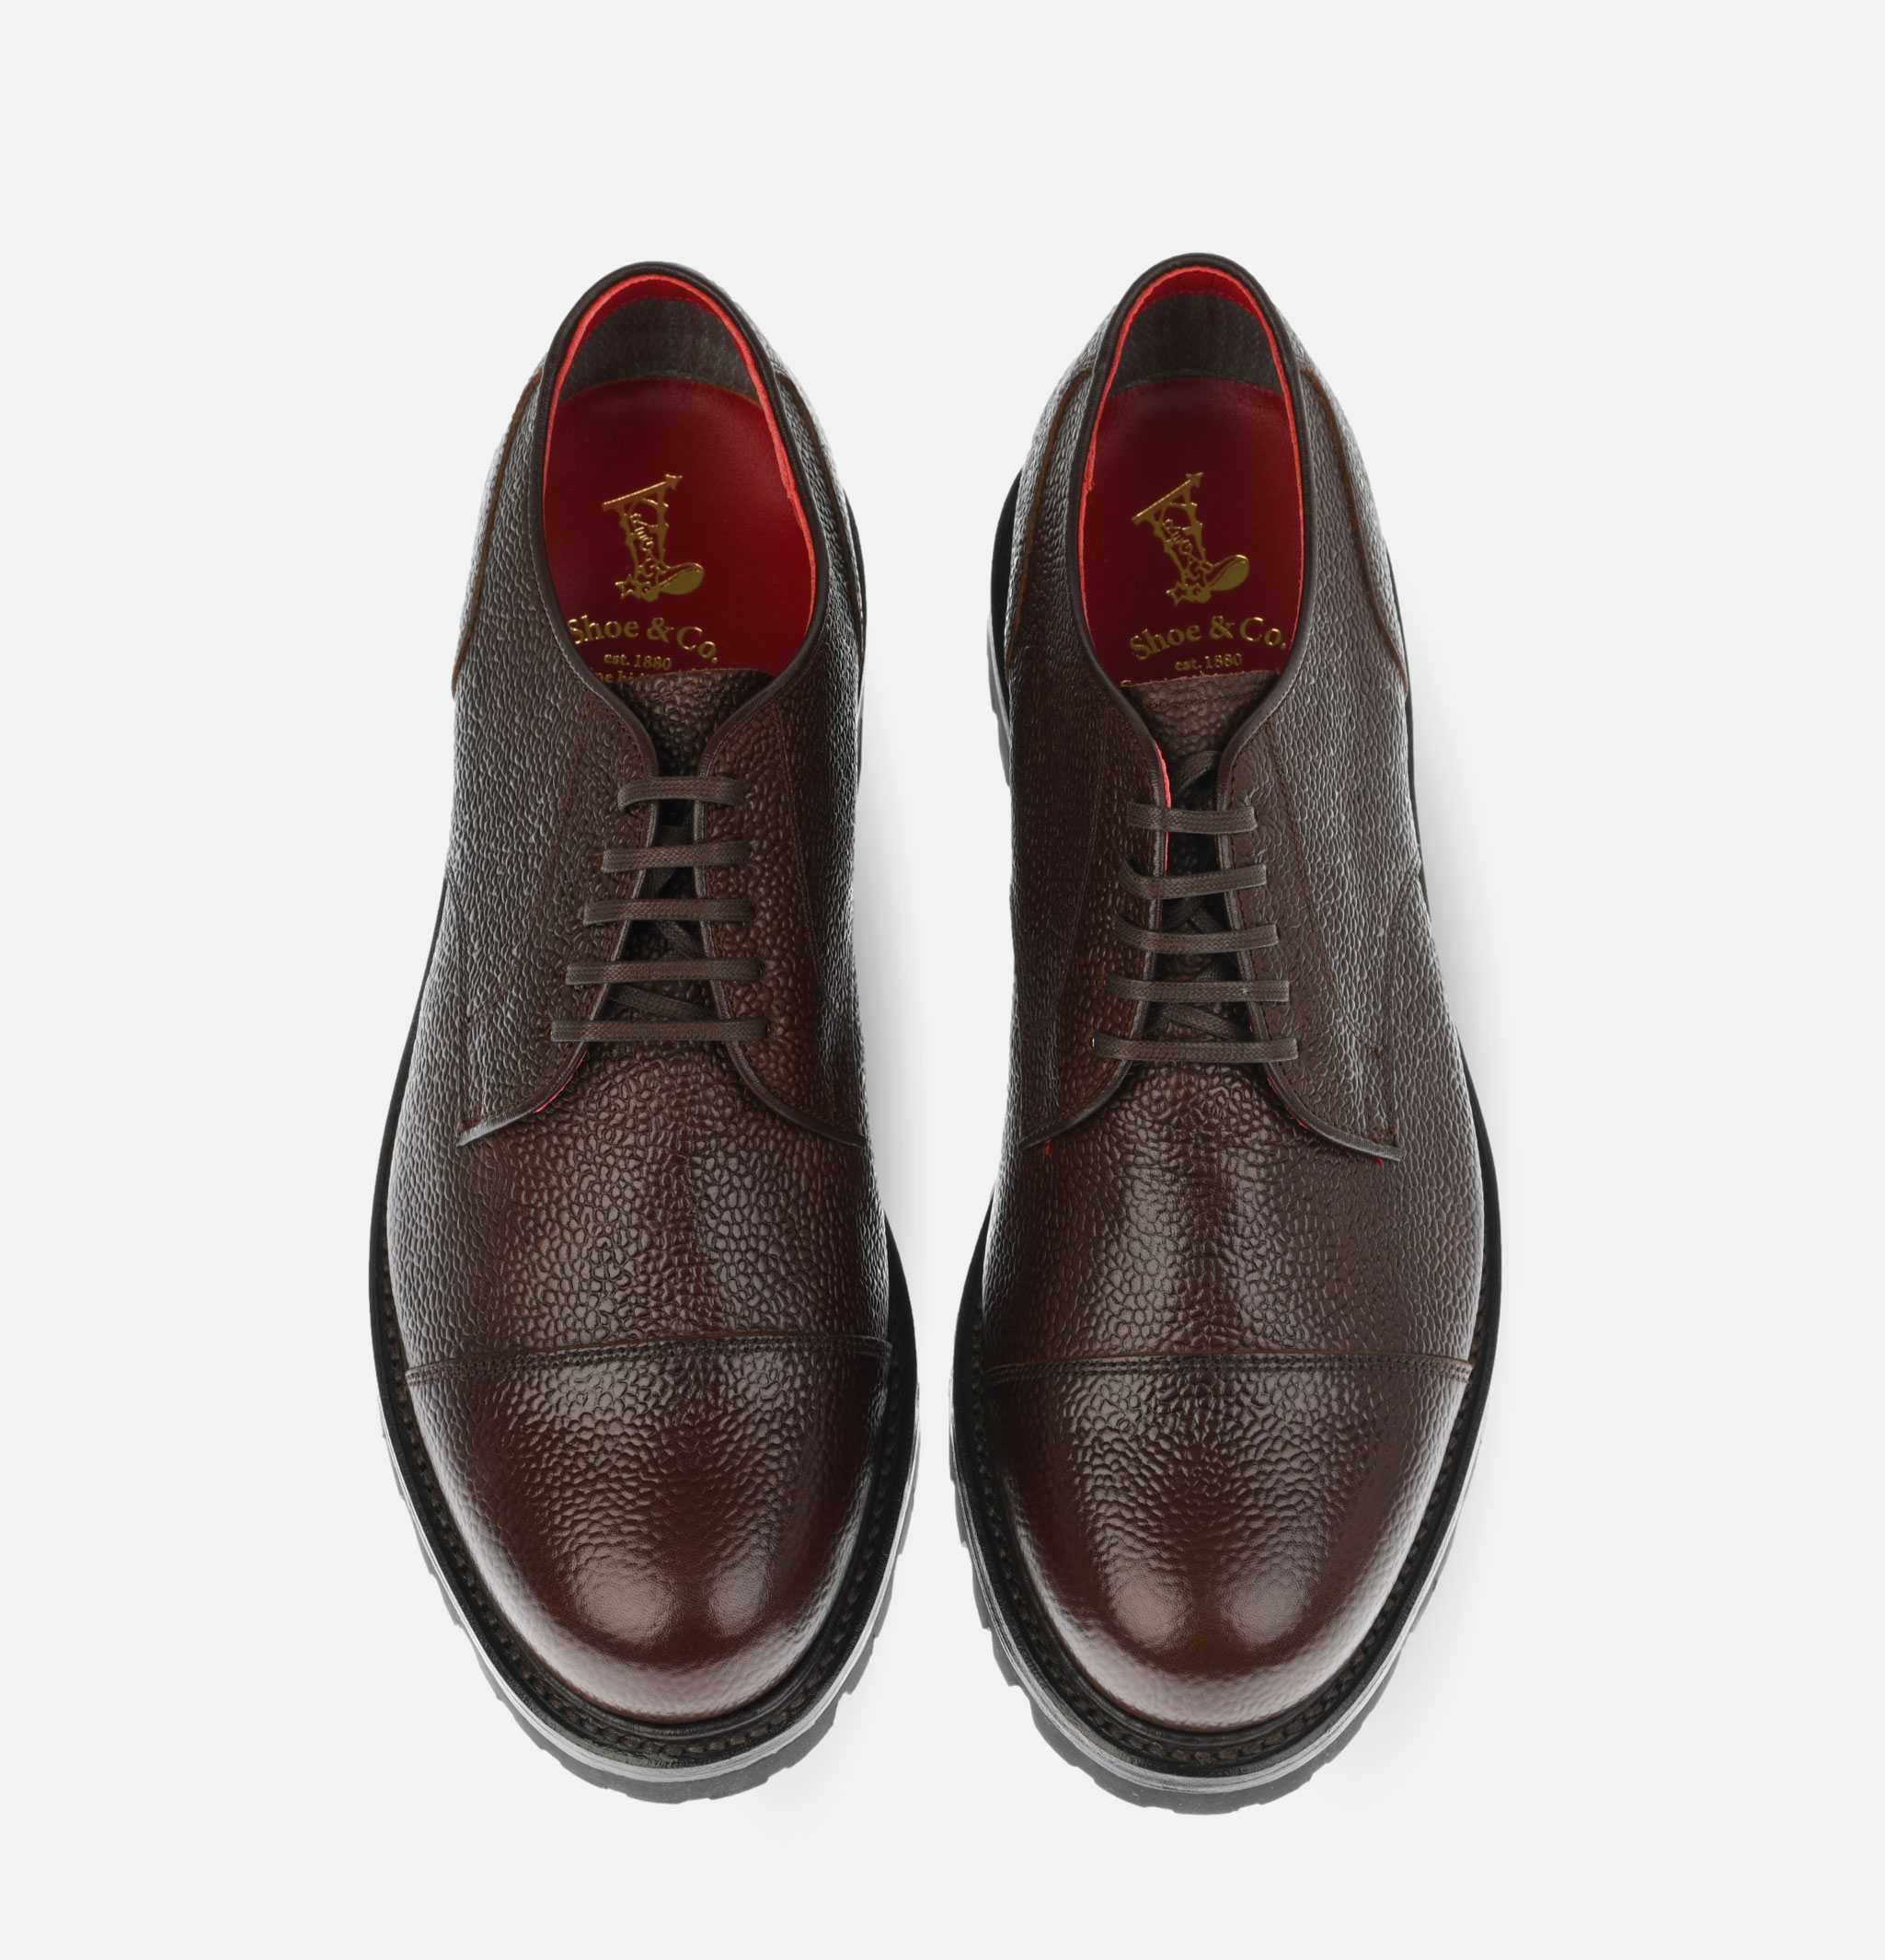 Chaussures Regal Shoe & Co Straight Tip Brown Gore-tex